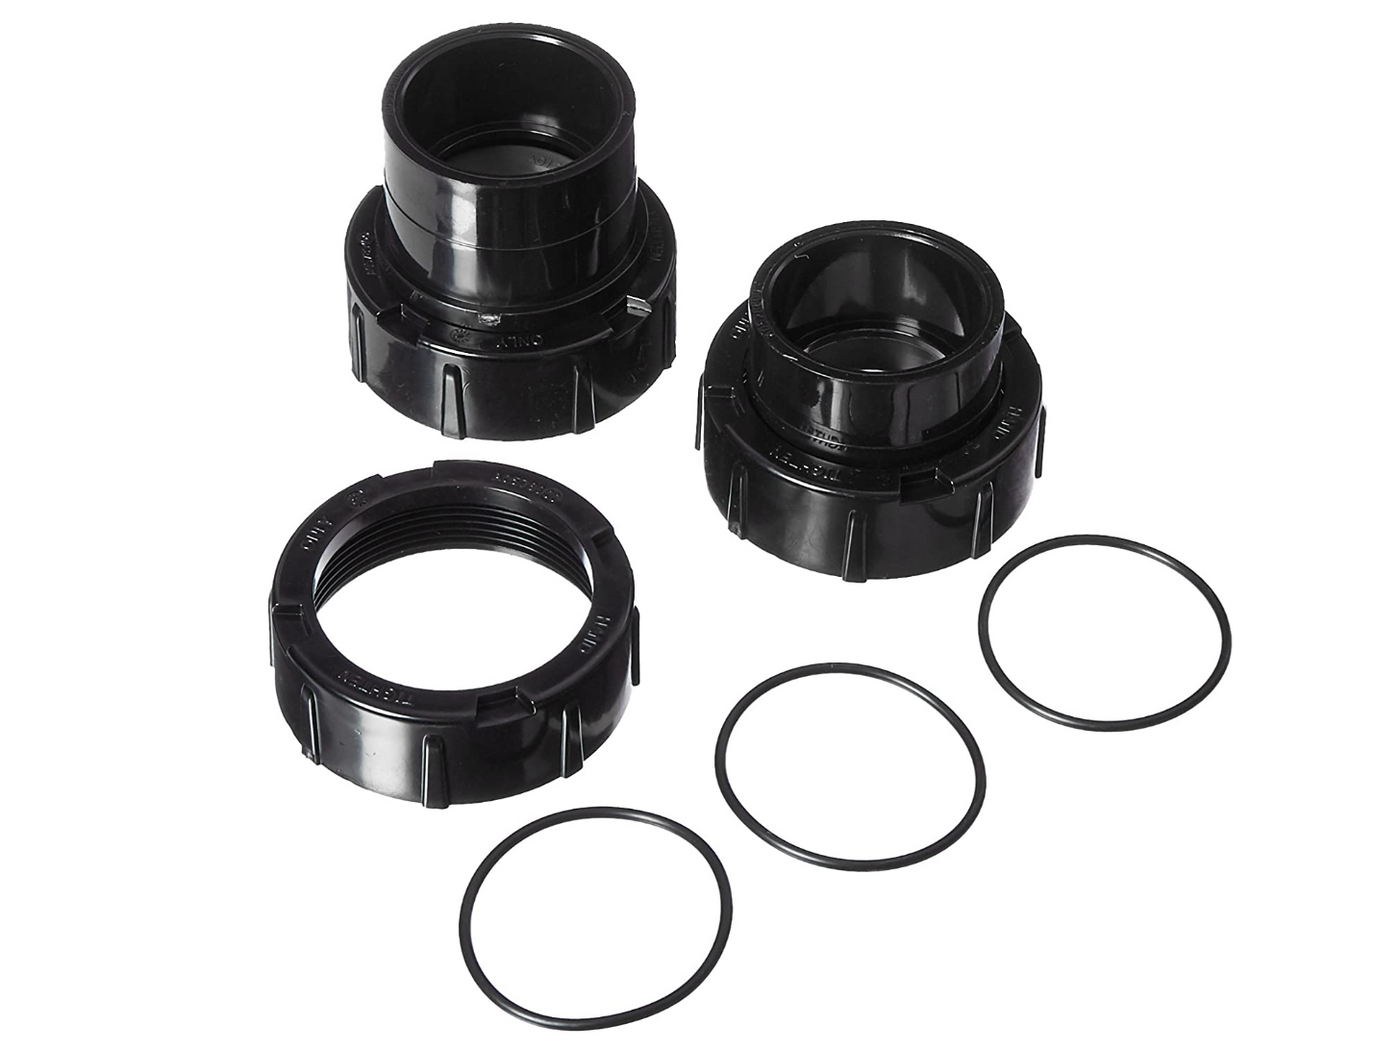 Zodiac R0452100 Universal Union Replacement Kit for Zodiac Jandy Pool and Spa Water Purification System